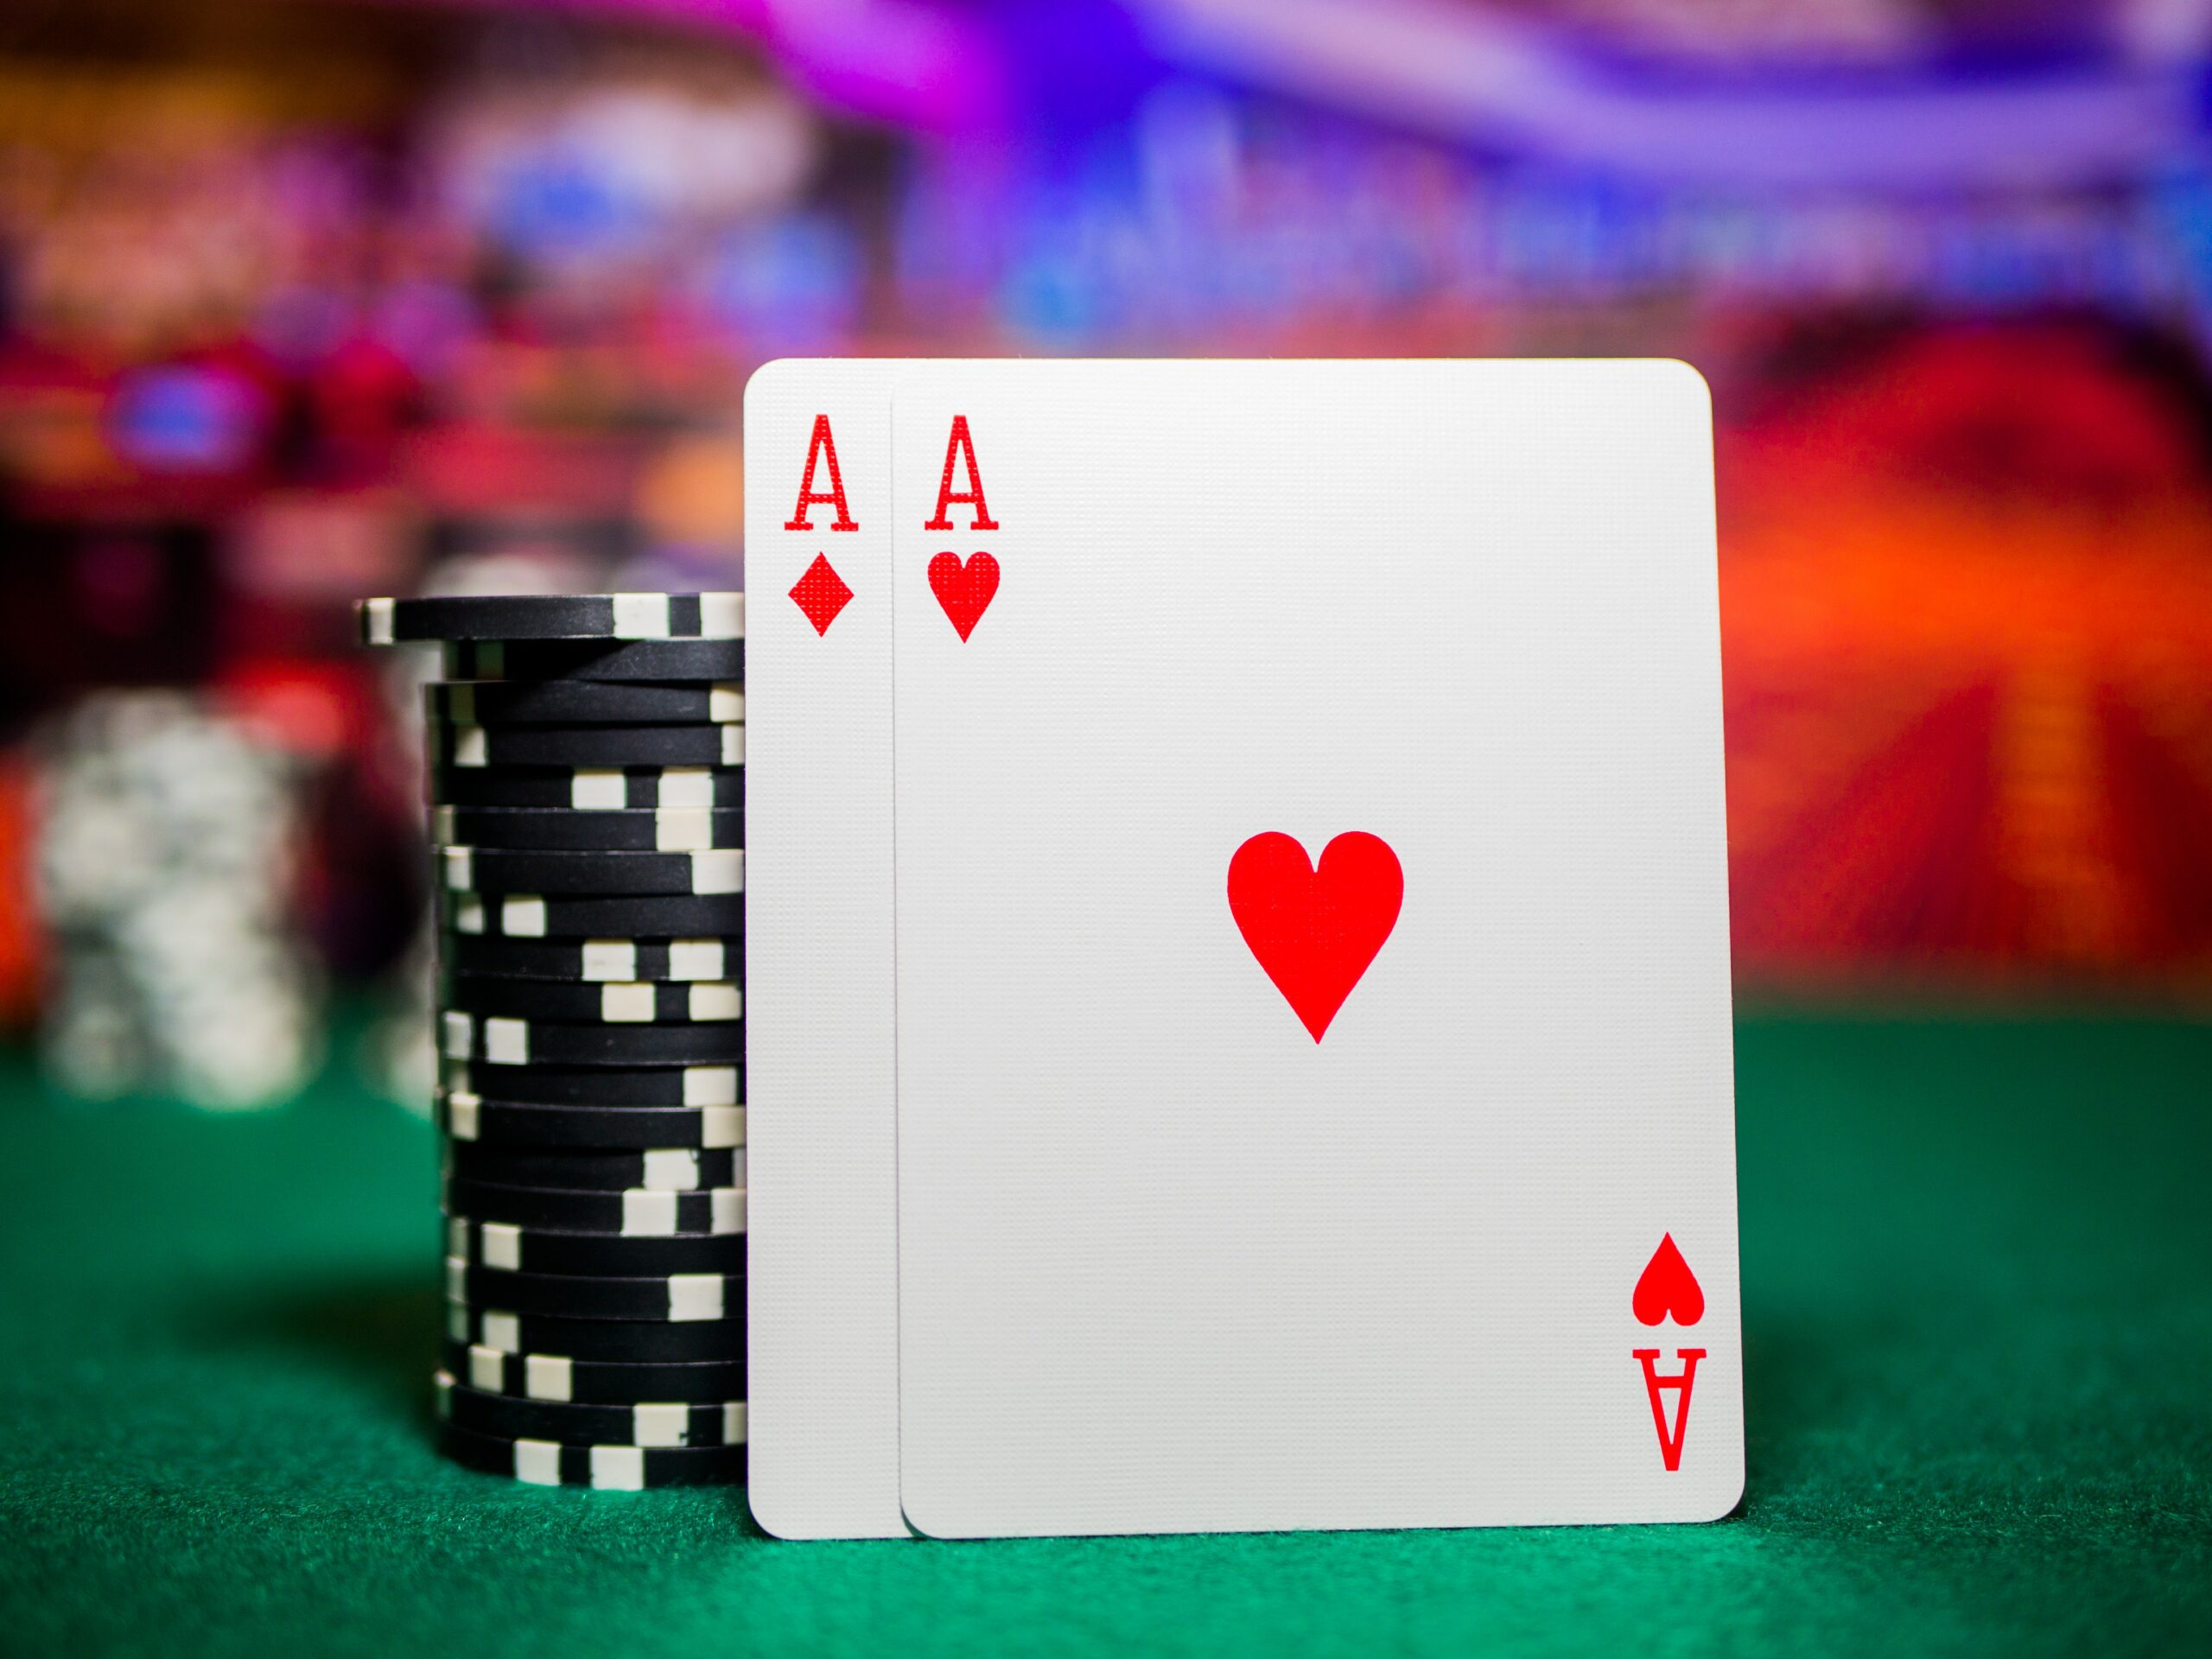 Play for free Online casinos before you Bet your Money